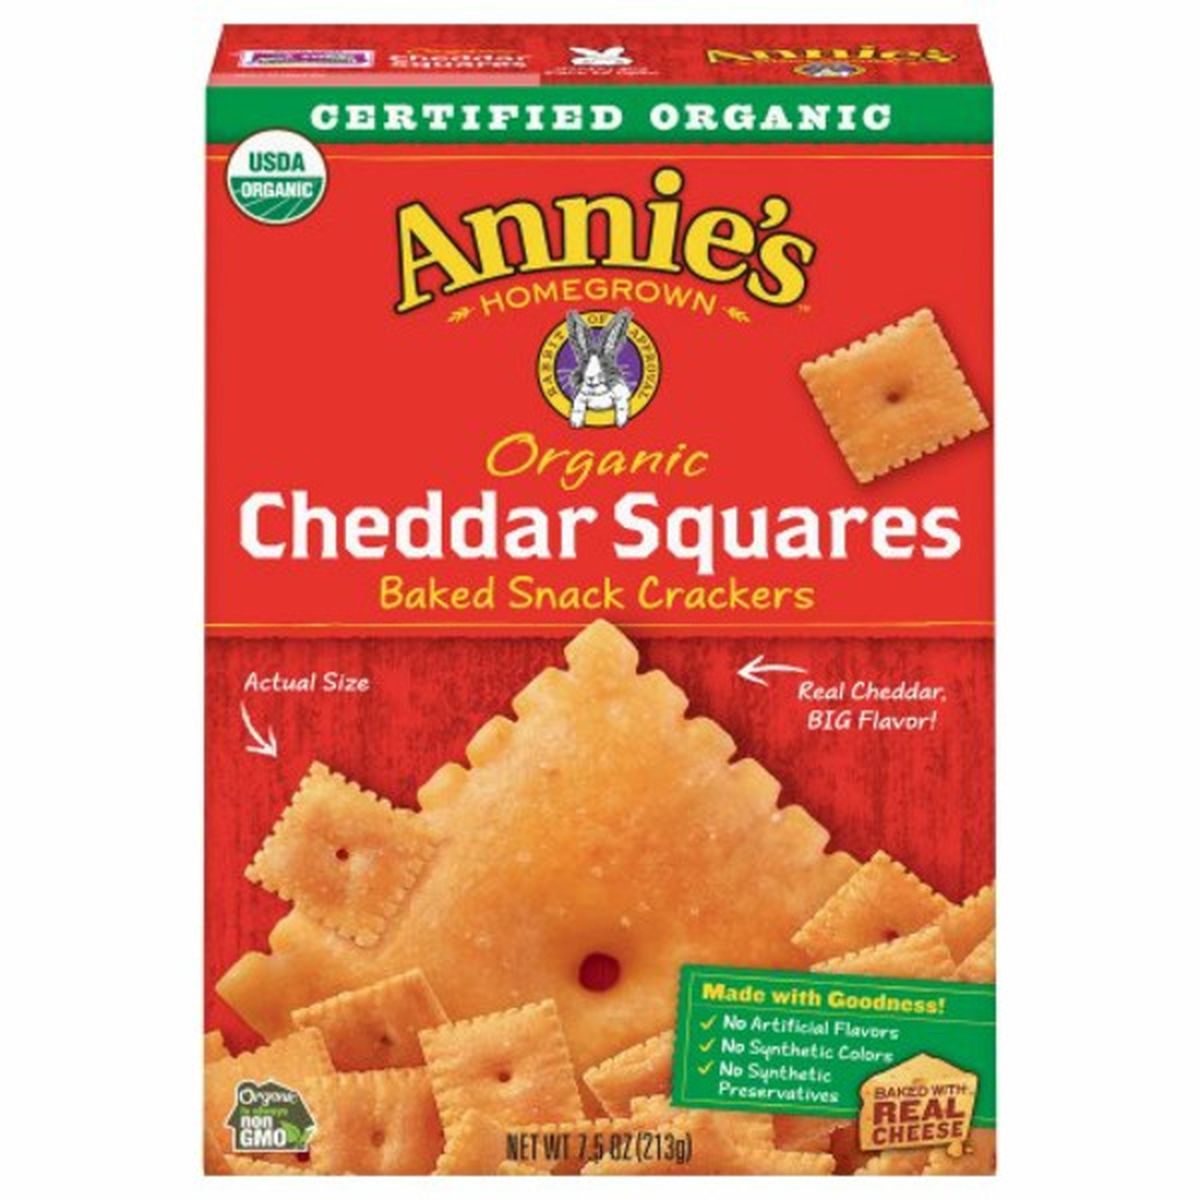 Calories in Annie's Baked Snack Crackers, Organic, Cheddar Squares